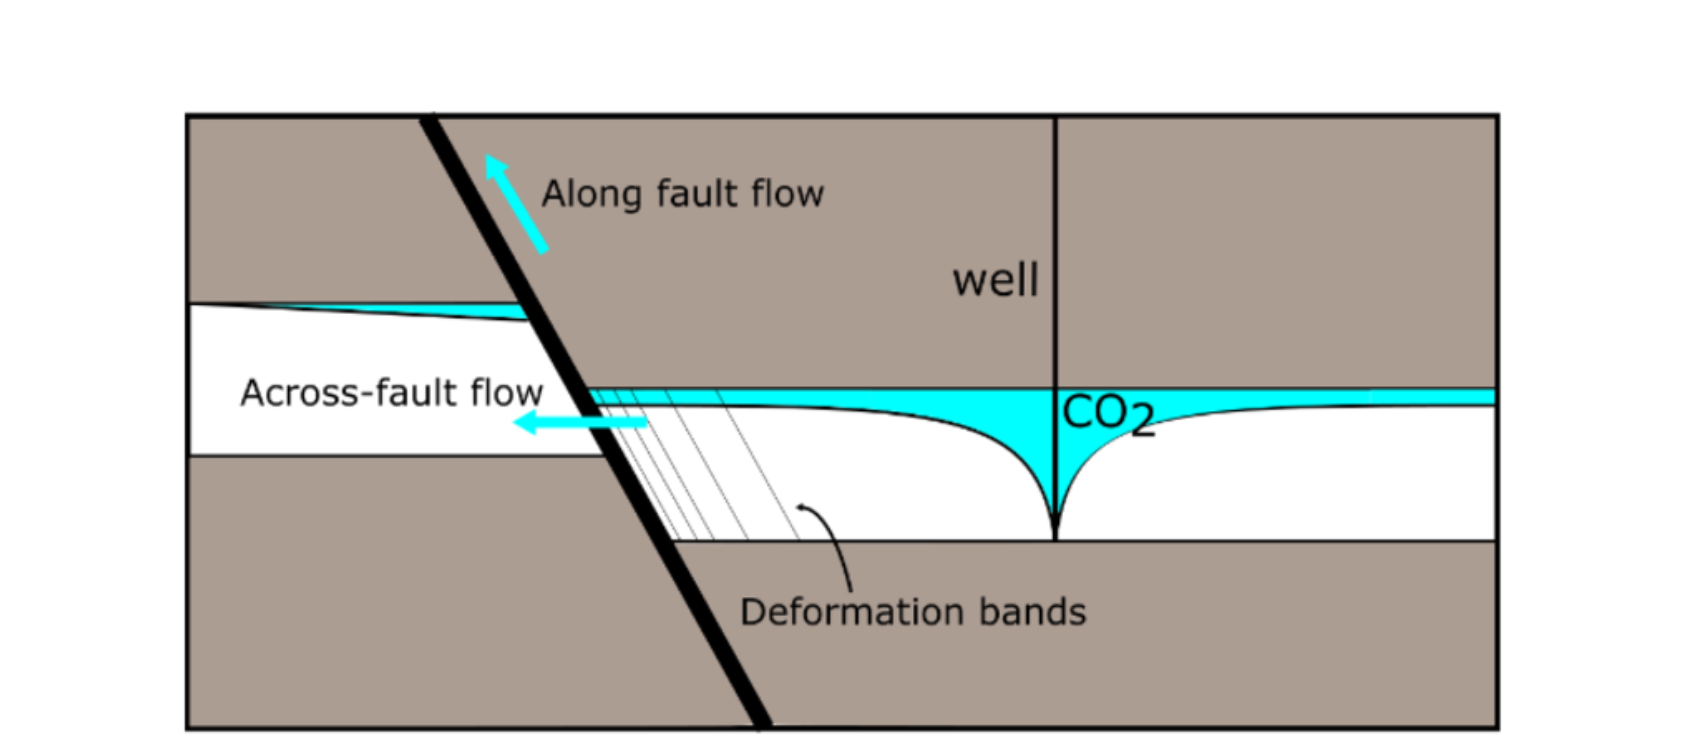 FRISK - Quantification of fault-related leakage risk - Norce